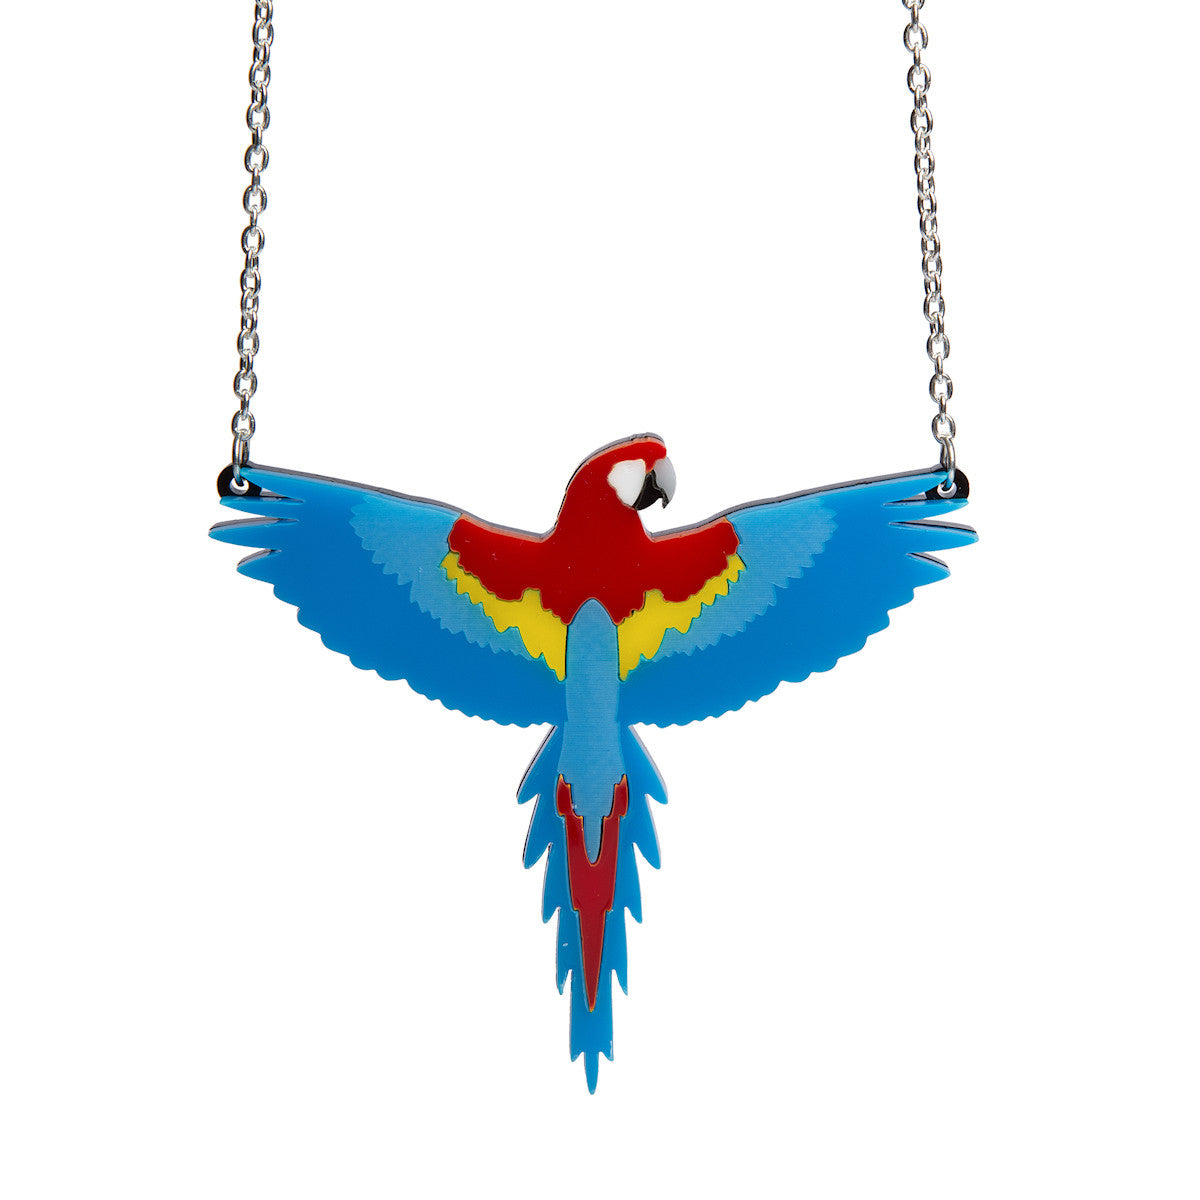 Sugar & Vice Scarlet Macaw Parrot Necklace